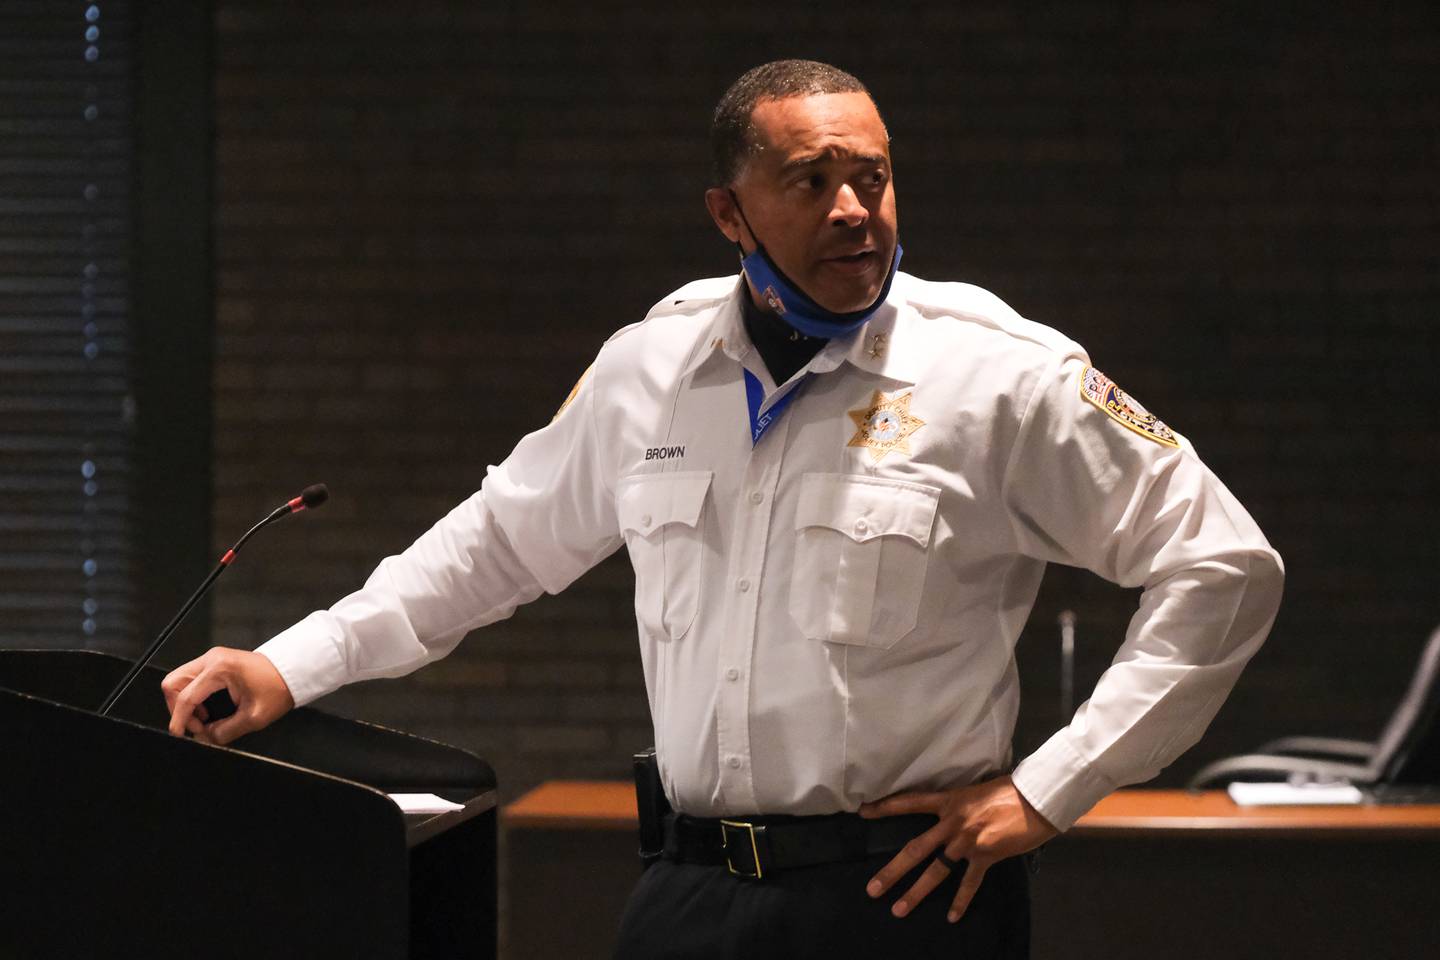 Interim Police Chief Robert Brown addresses productive meetings in the past with the public regarding the Police Department Citizen Advisory Board proposal at the Council Chambers in Joliet City Hall. Monday Nov. 8, 2021.